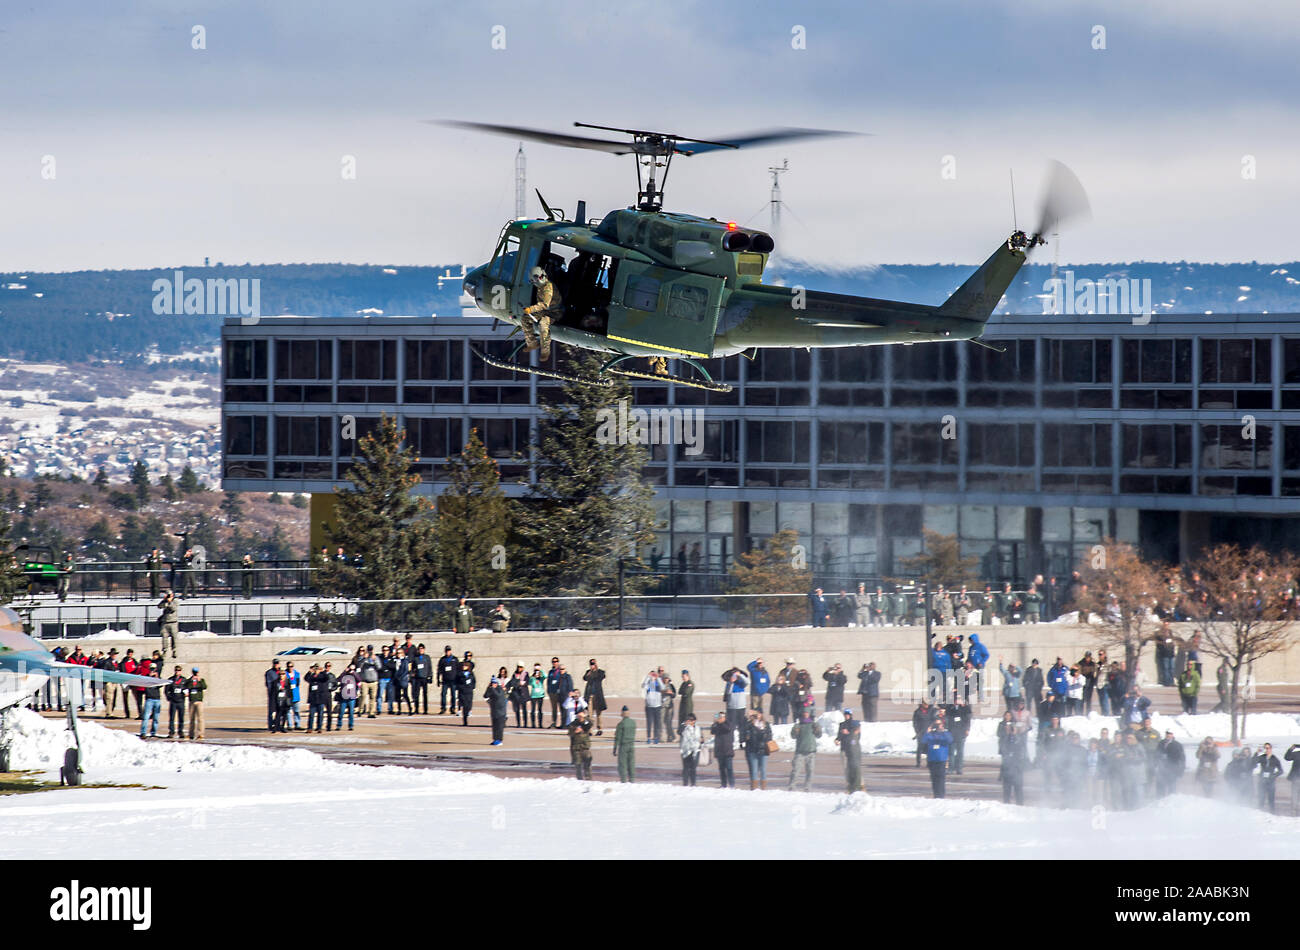 U.S. AIR FORCE ACADEMY, Colo. –  A UH-1N helicopter lands on the U.S. Air Force Academy Terrazzo on Nov. 1, 2019 during an airpower demonstration. The demonstration included an assortment of aircraft from fighter jets to helicopters, including a CV-22 Osprey. (U.S. Air Force photo/Trevor Cokley) Stock Photo